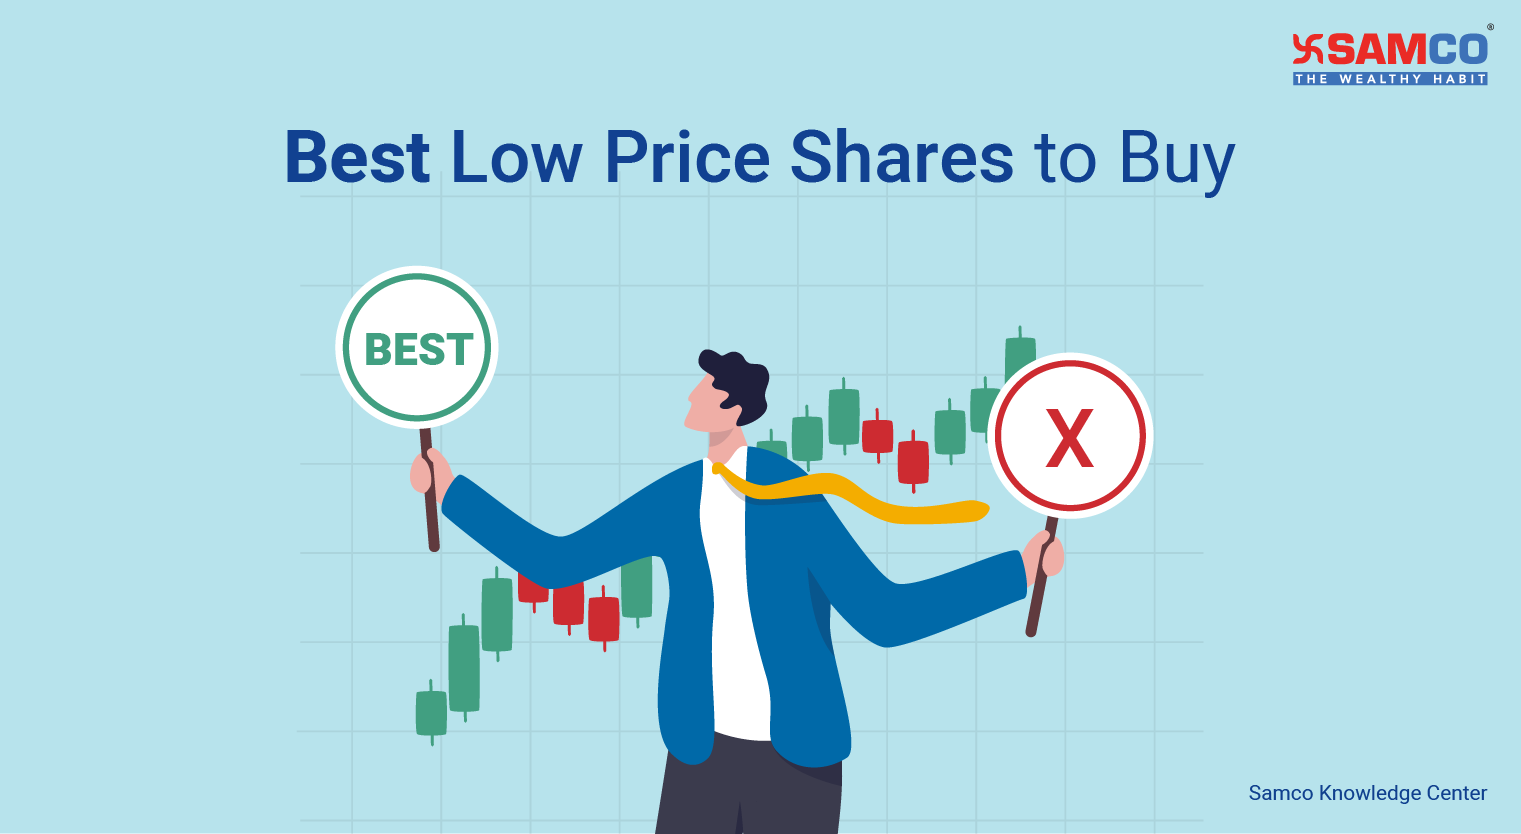 BEST Low Price Shares to Buy